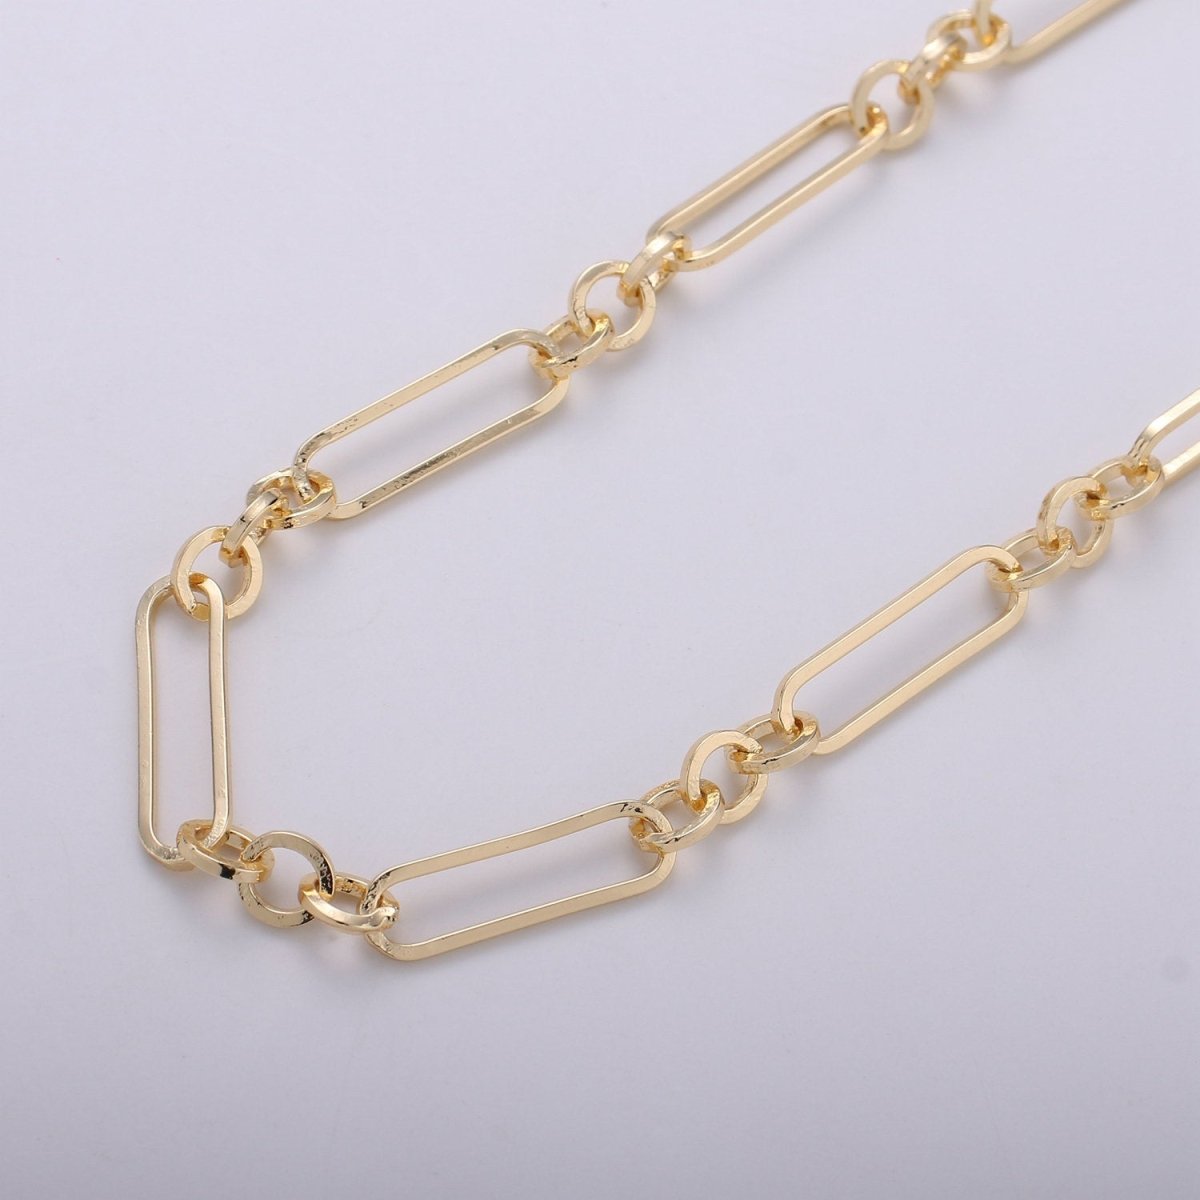 Gold Paper Clip Chain, 6 X 21.5mm 16K Gold Filled Rolo Paper Clip Chain, Thin Flat Jewelry Making, Unfinished Chain | ROLL-247 Clearance Pricing - DLUXCA